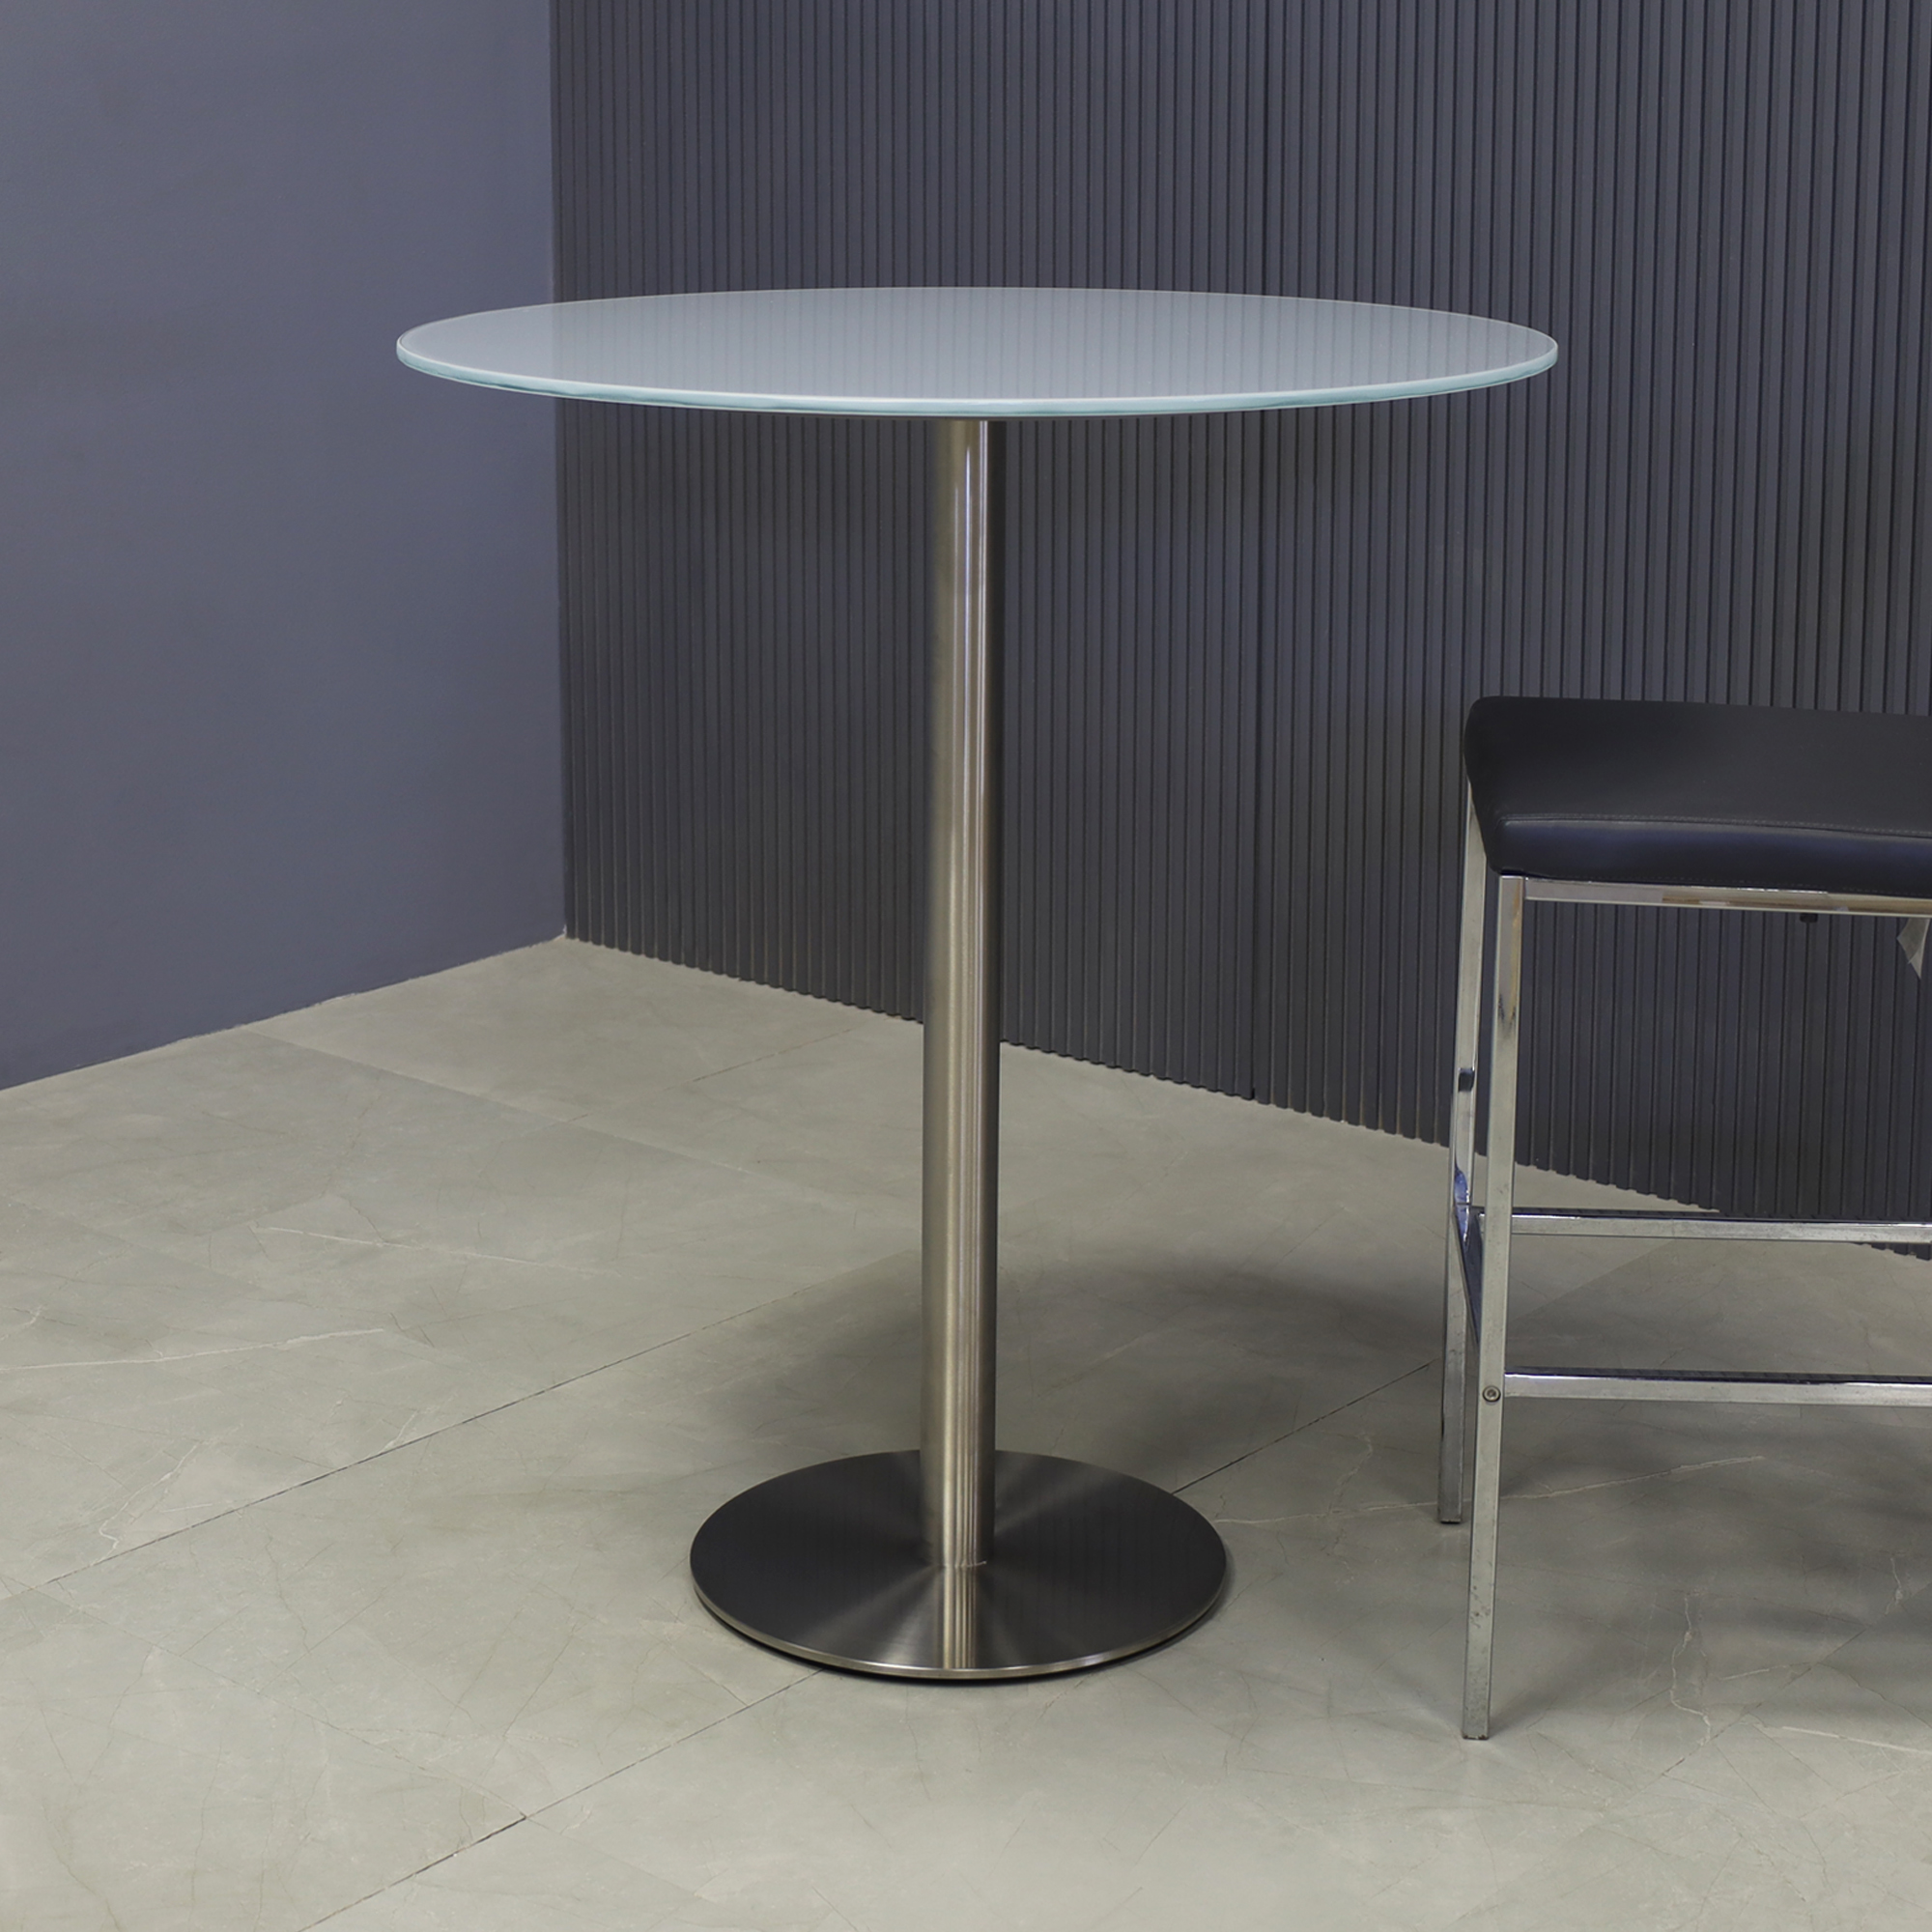 36-inch California Round Bar Table in 1/2